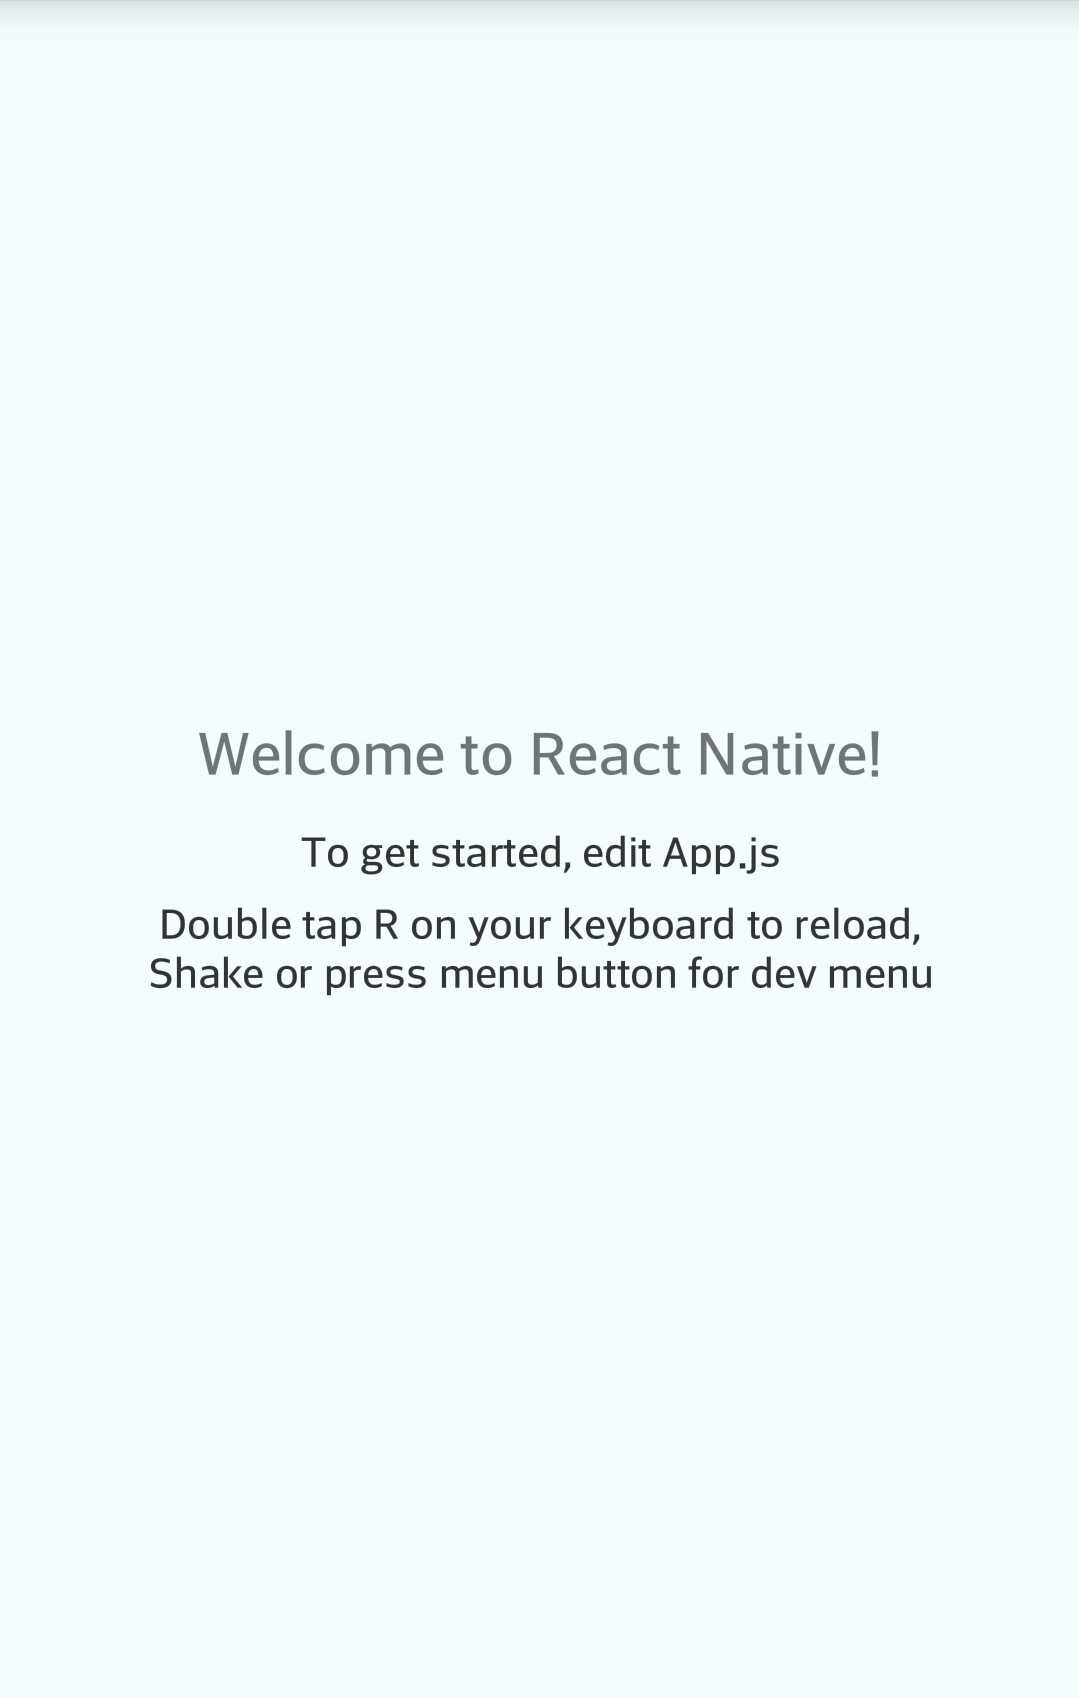 RN(React Native) apply custom font to Android - basic font